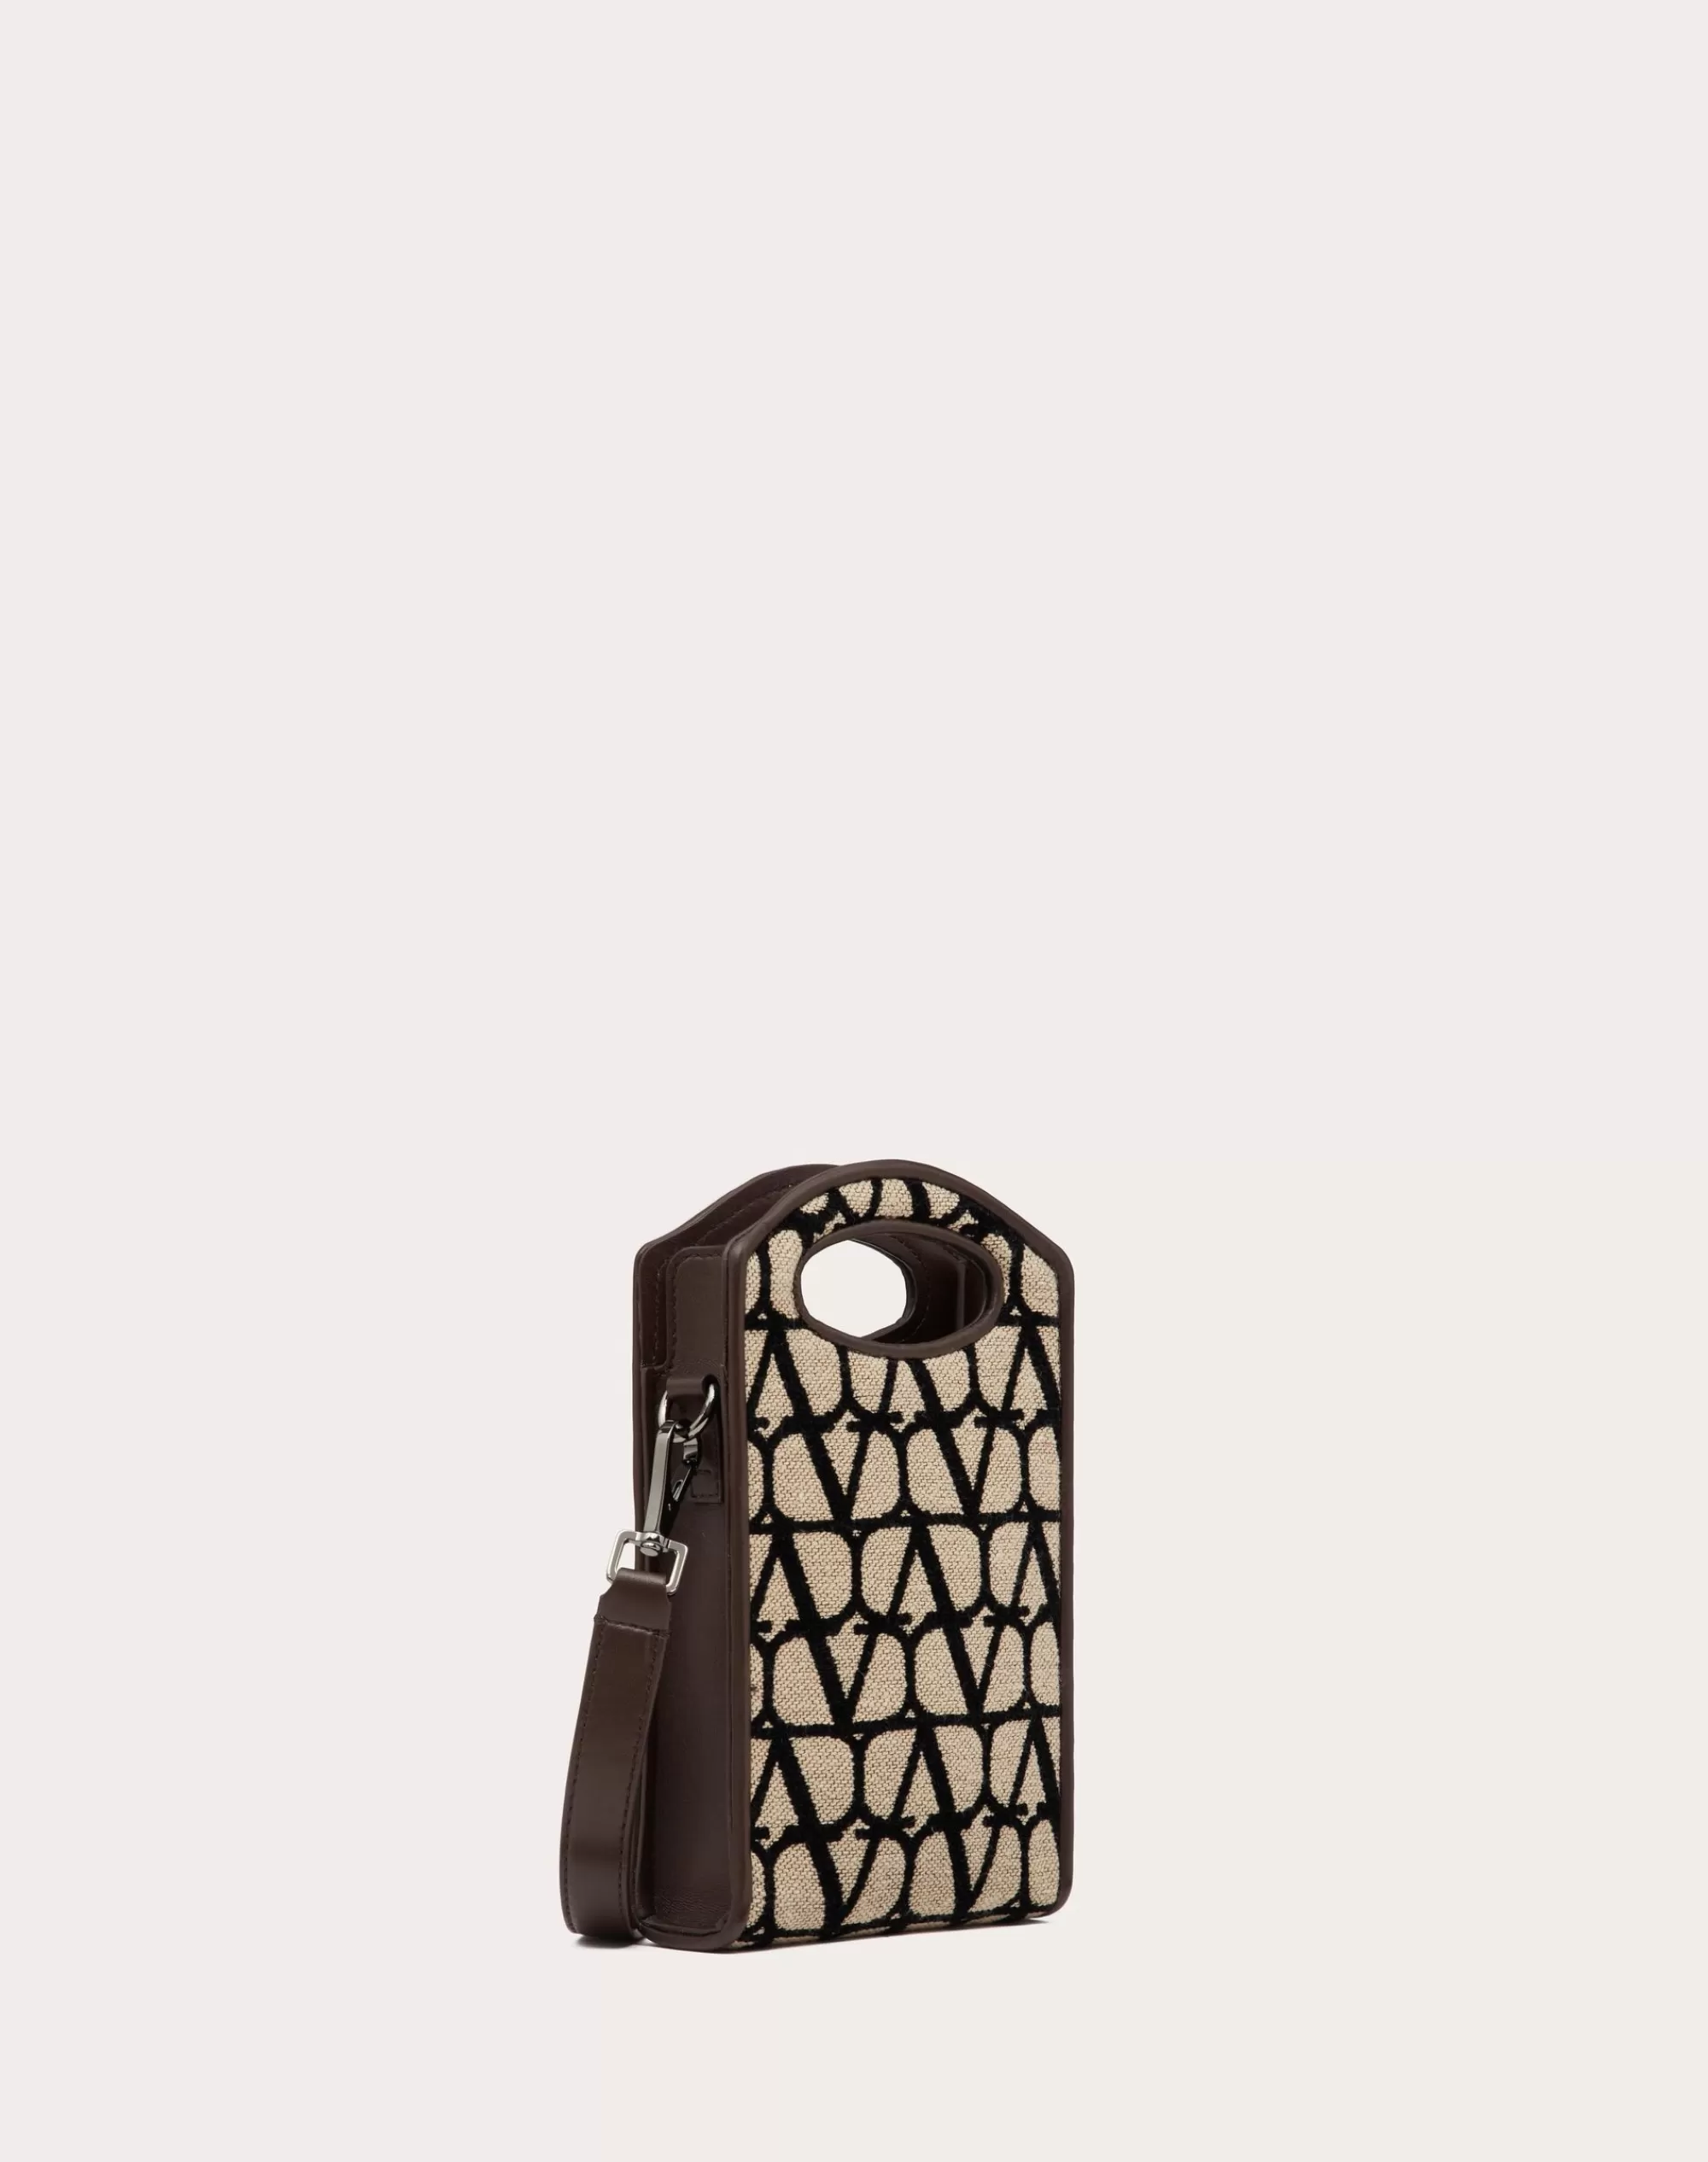 Valentino MINI CROSSBODY BAG WITH TOILE ICONOGRAPHE PRINT AND LEATHER DETAILS Beige/black Best